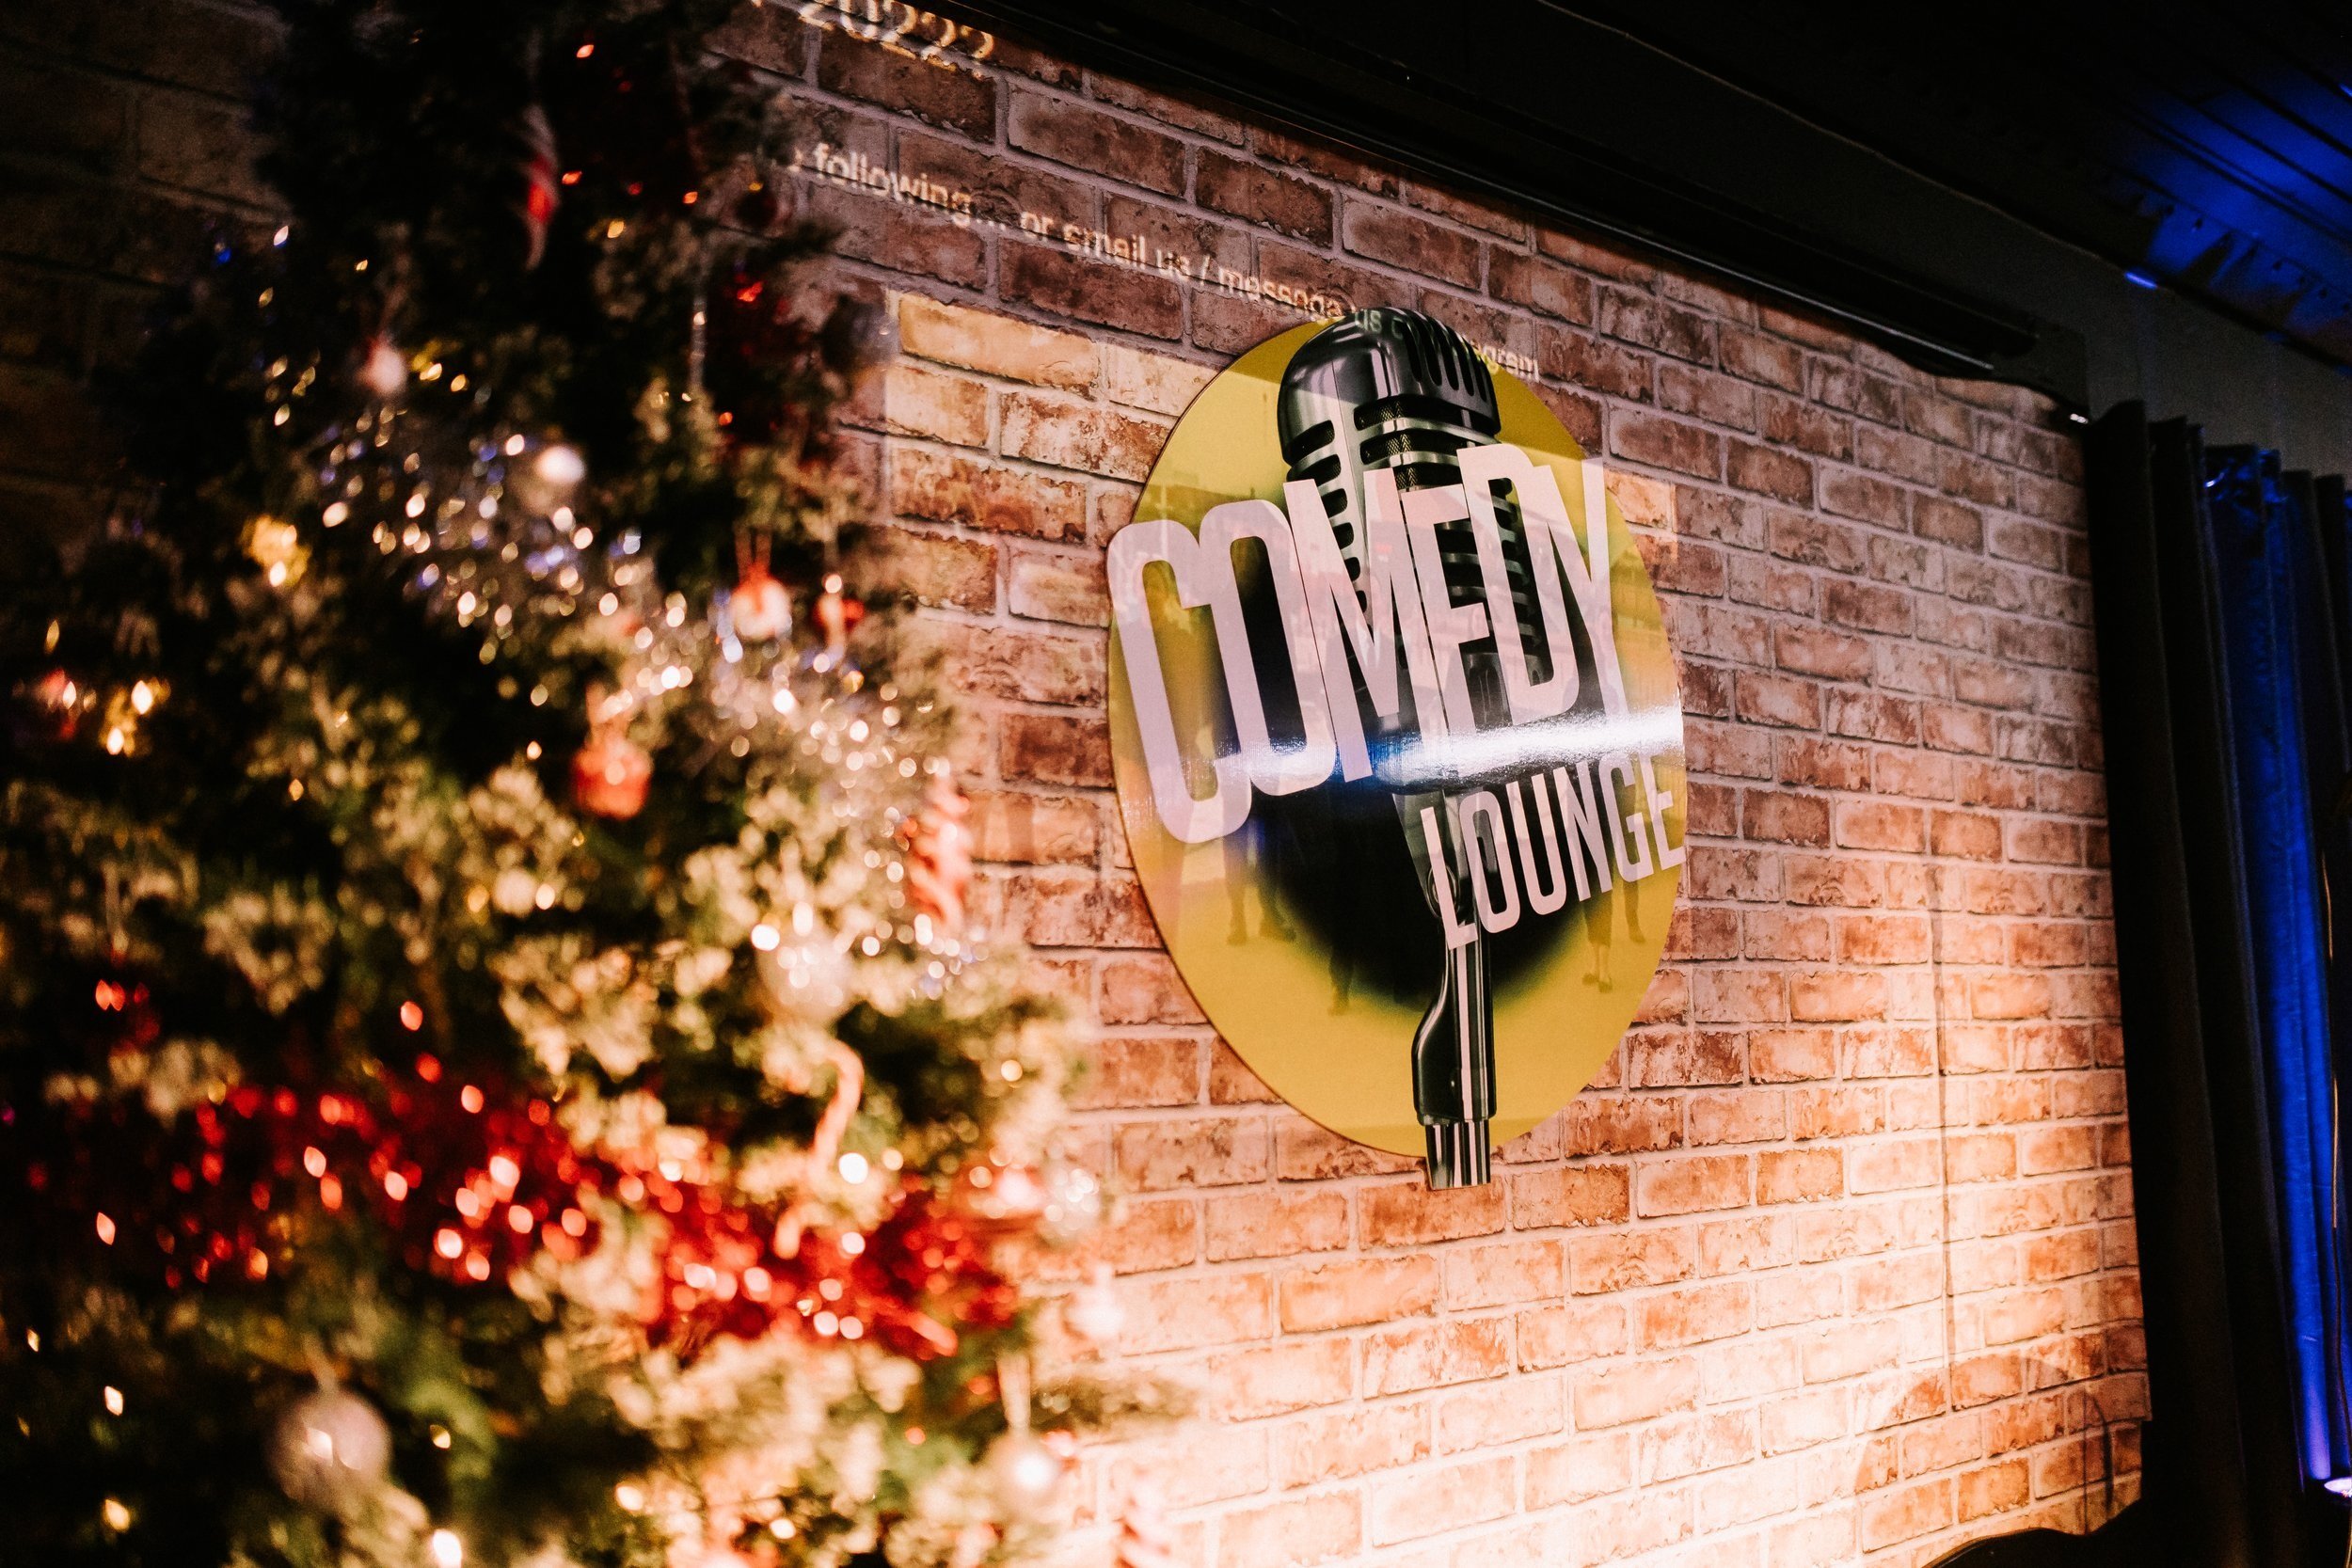 Xmas Party at the Comedy Lounge - Dec 2021